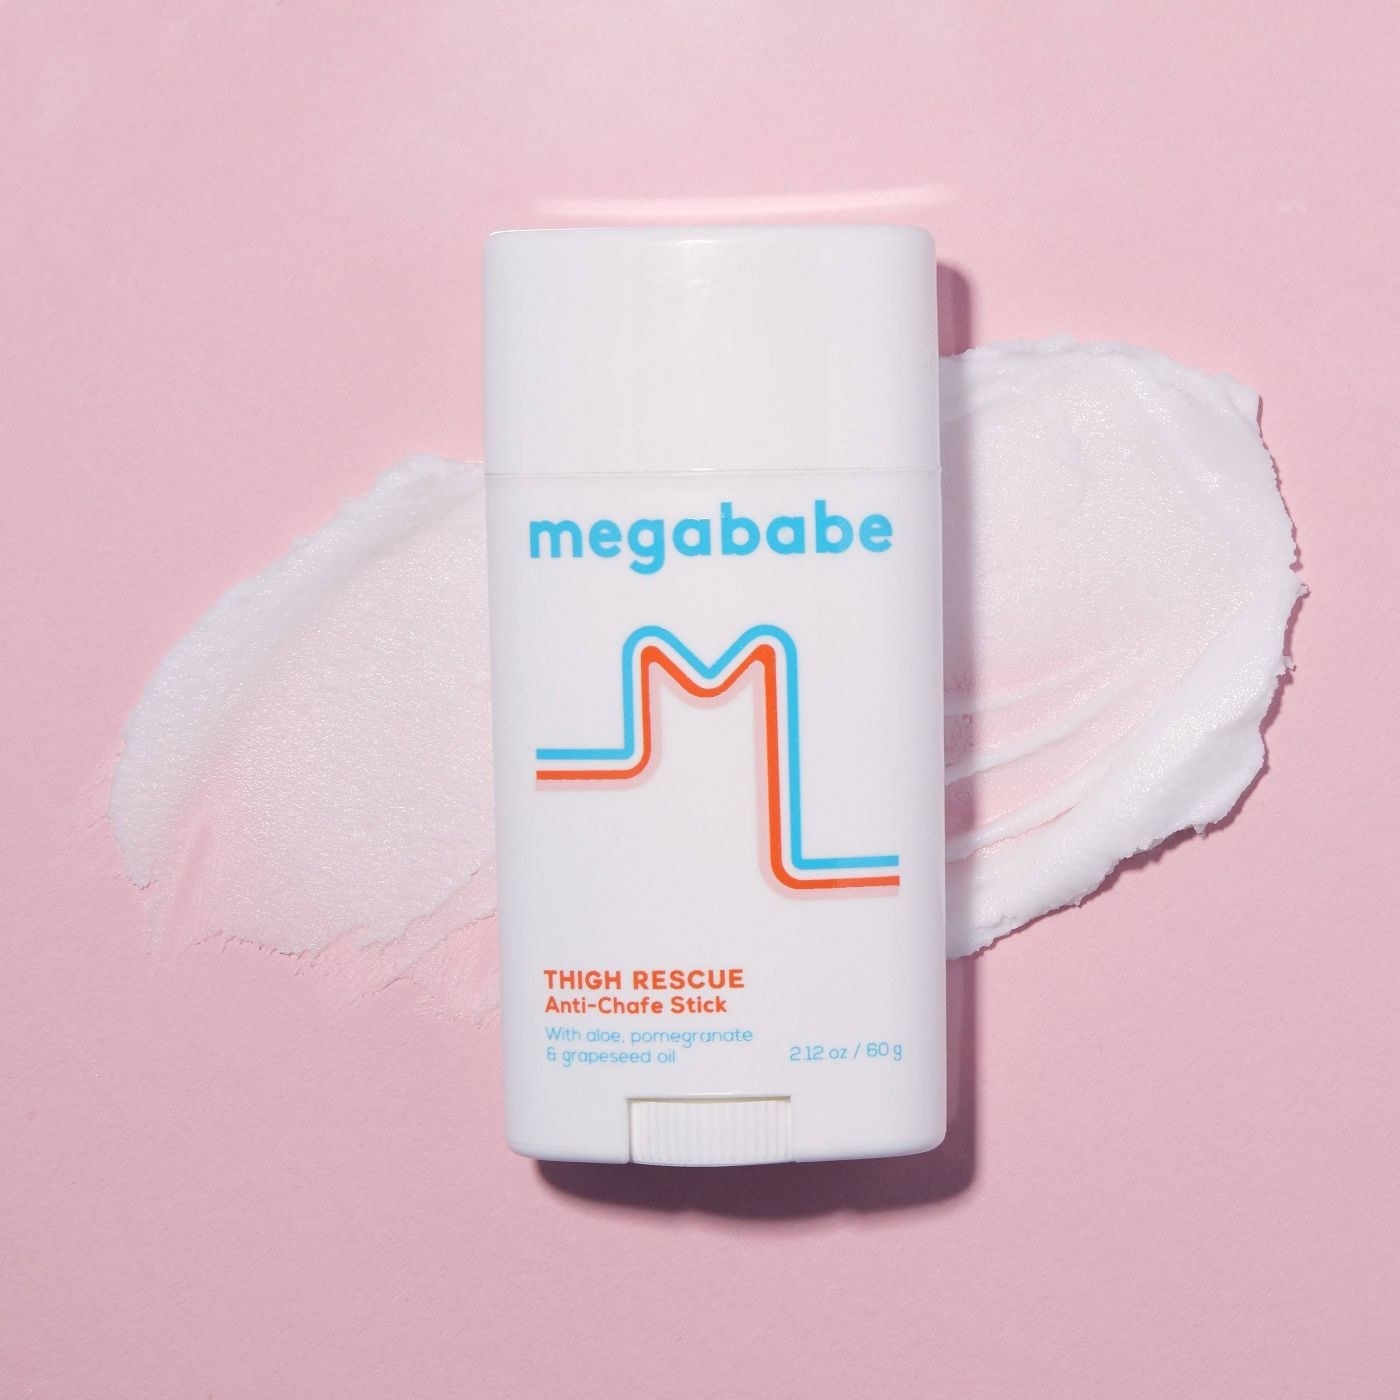 A white stick of Megababe anti-chafe with red and blue branding